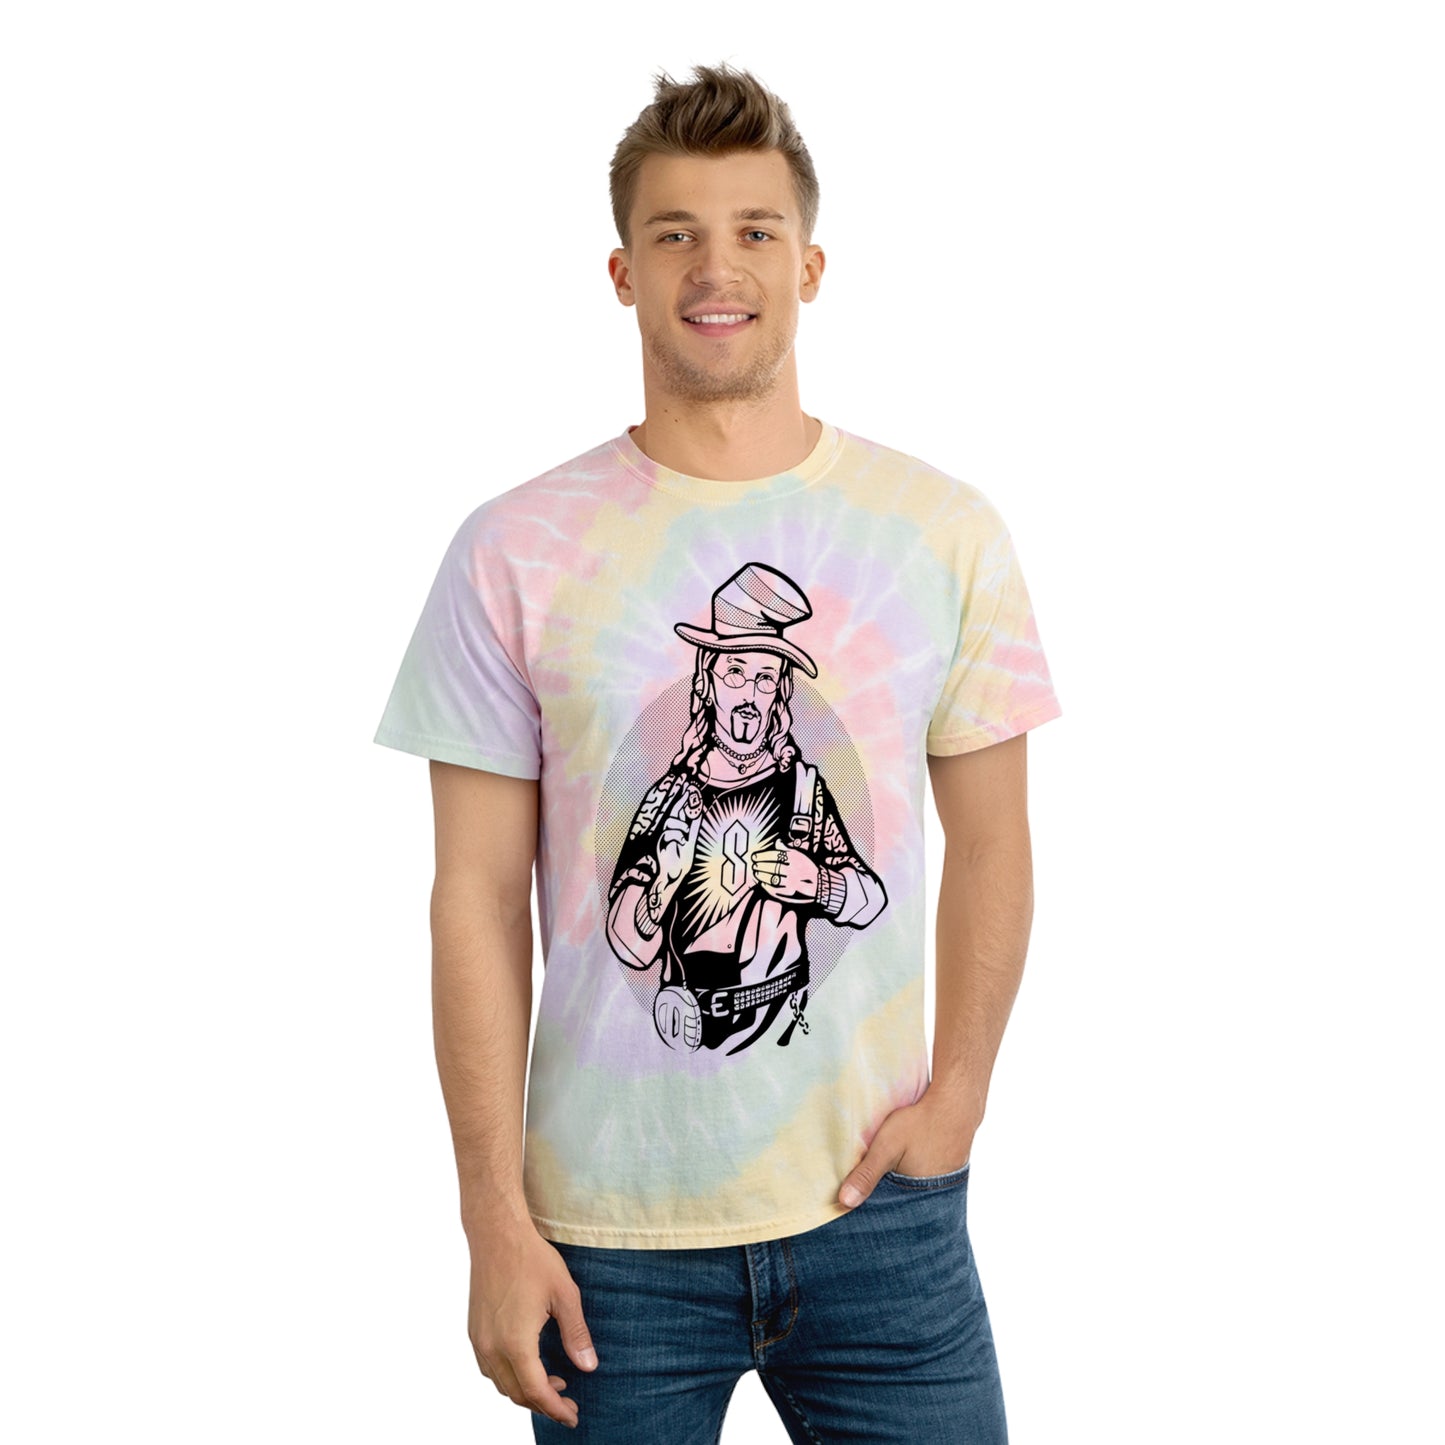 Jesus Is All That and a Bag of Chips tie-dye t-shirt